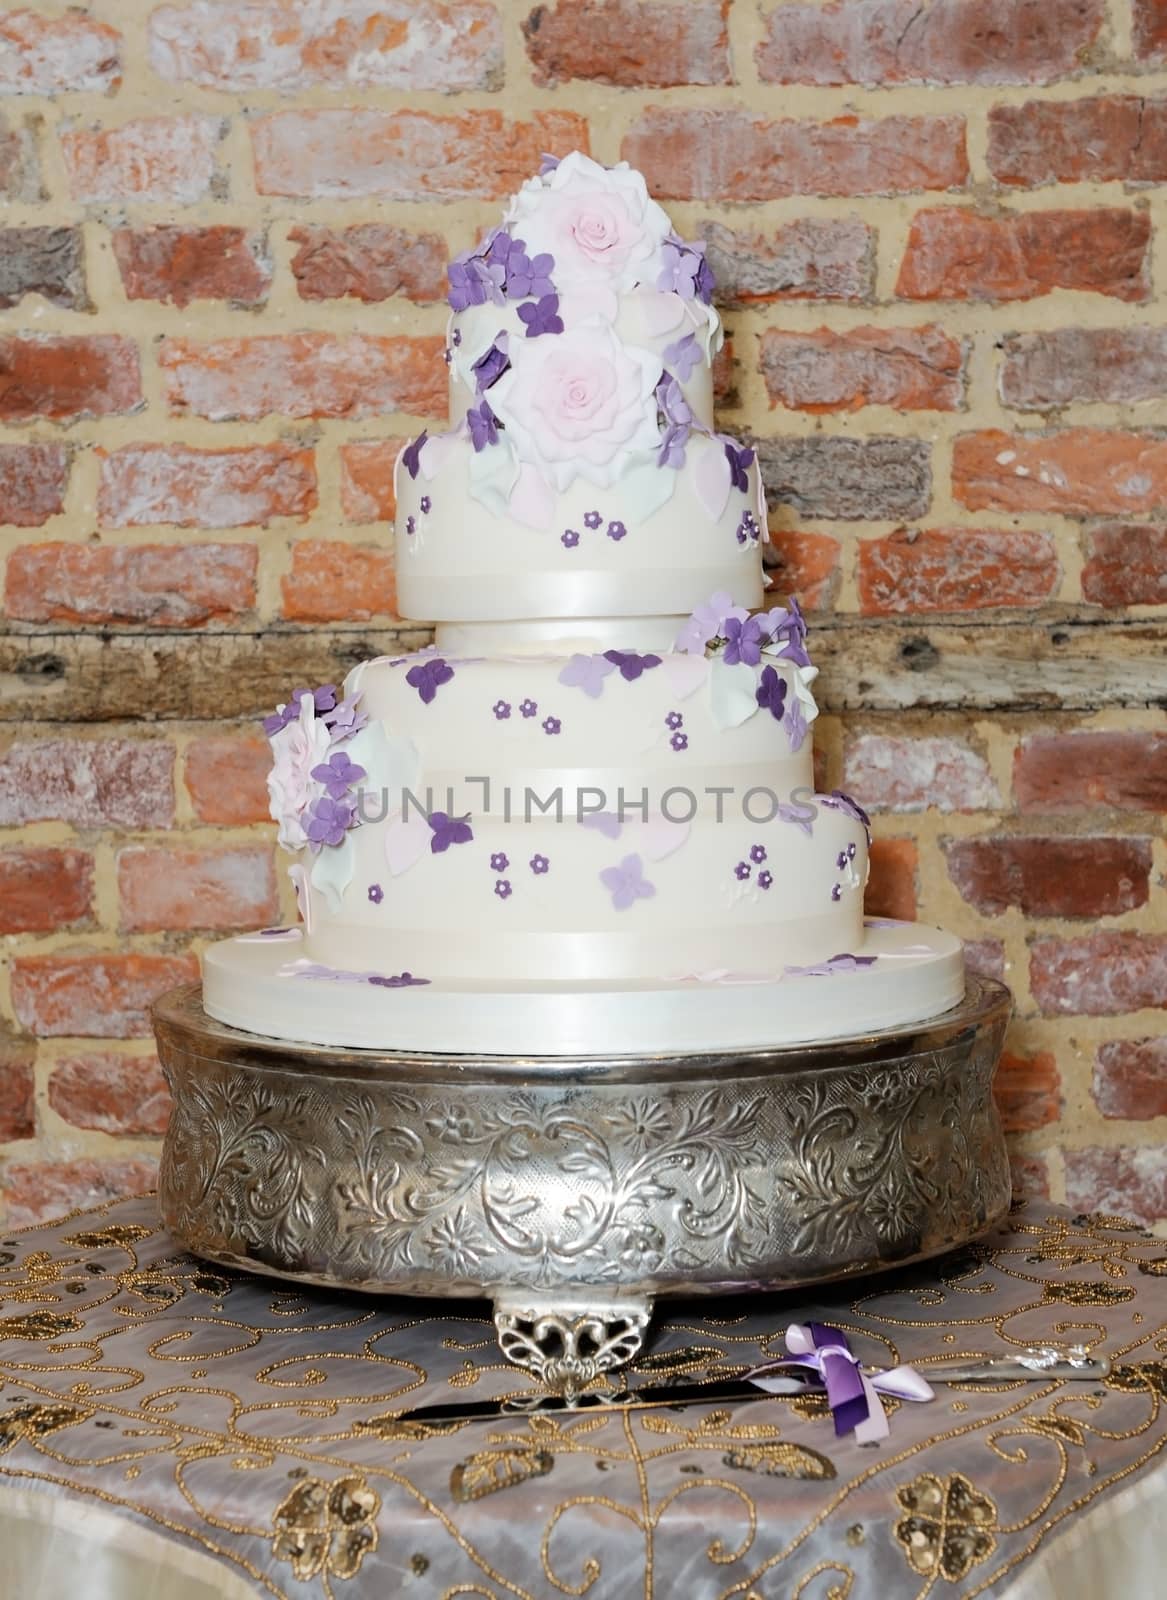 Wedding cake and knife by kmwphotography